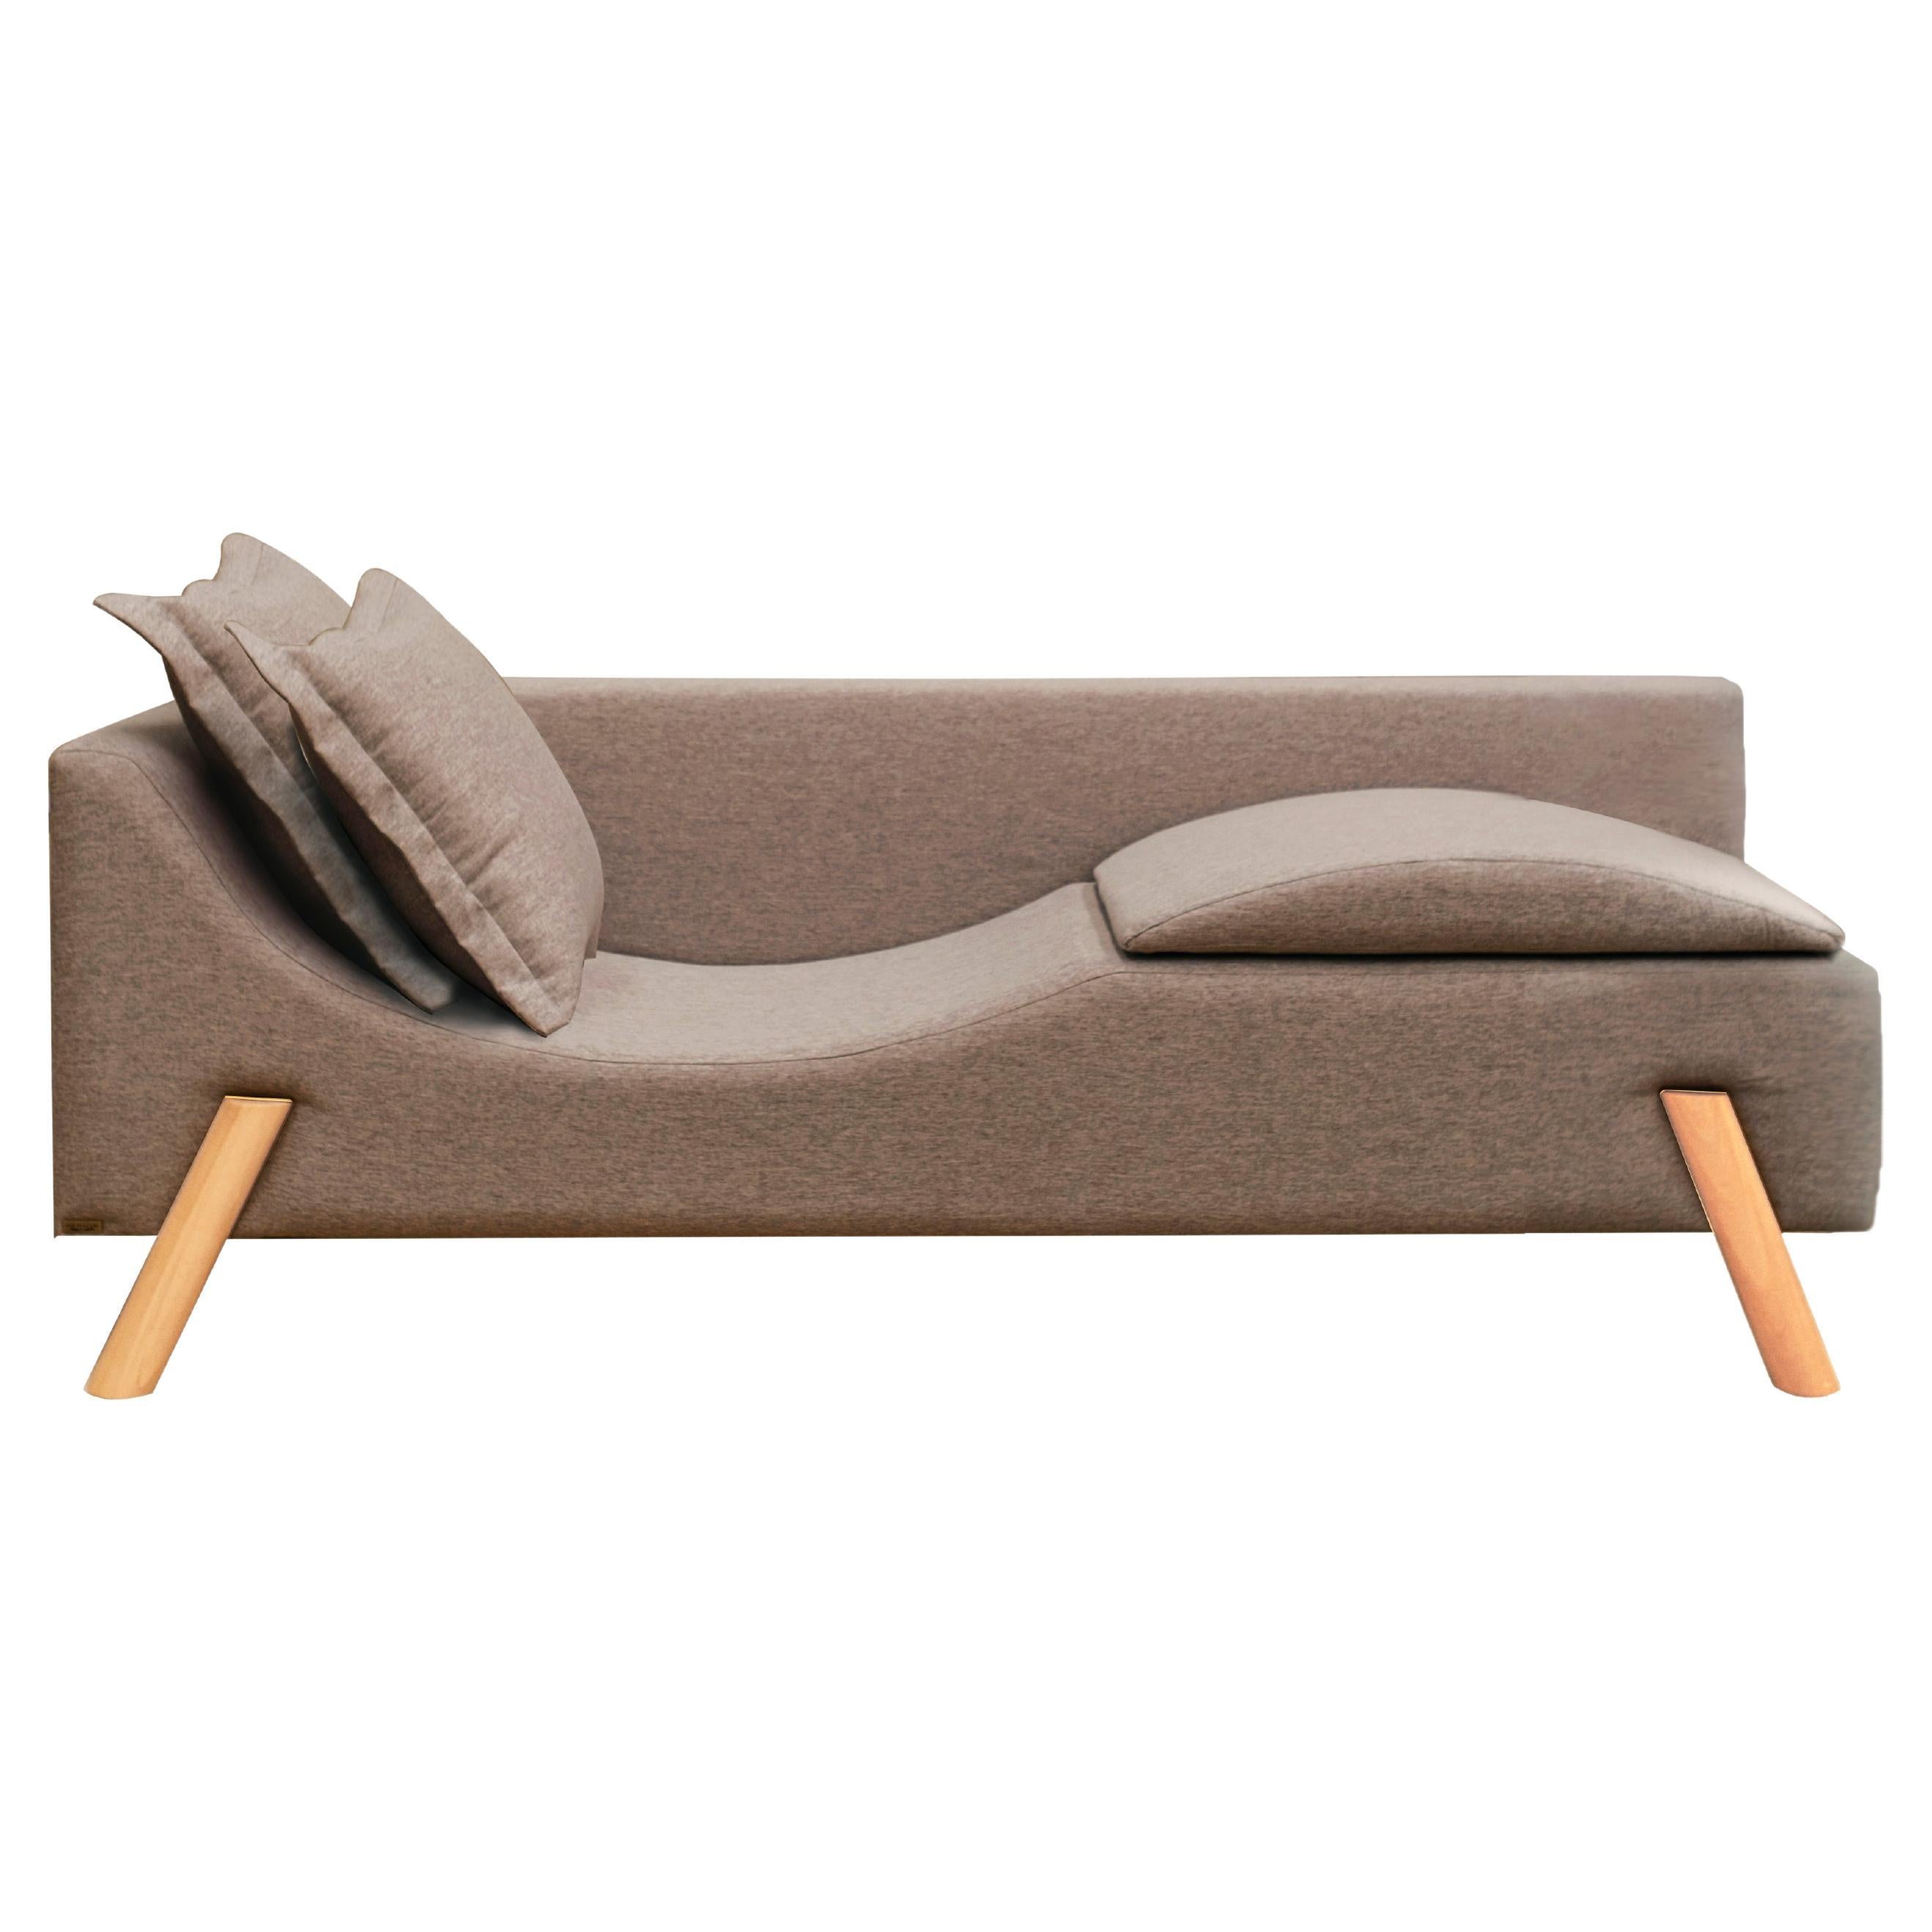 "Flag" Couch Chaise Longue in Dark Brown Linen and Wood Feet, Small Size For Sale